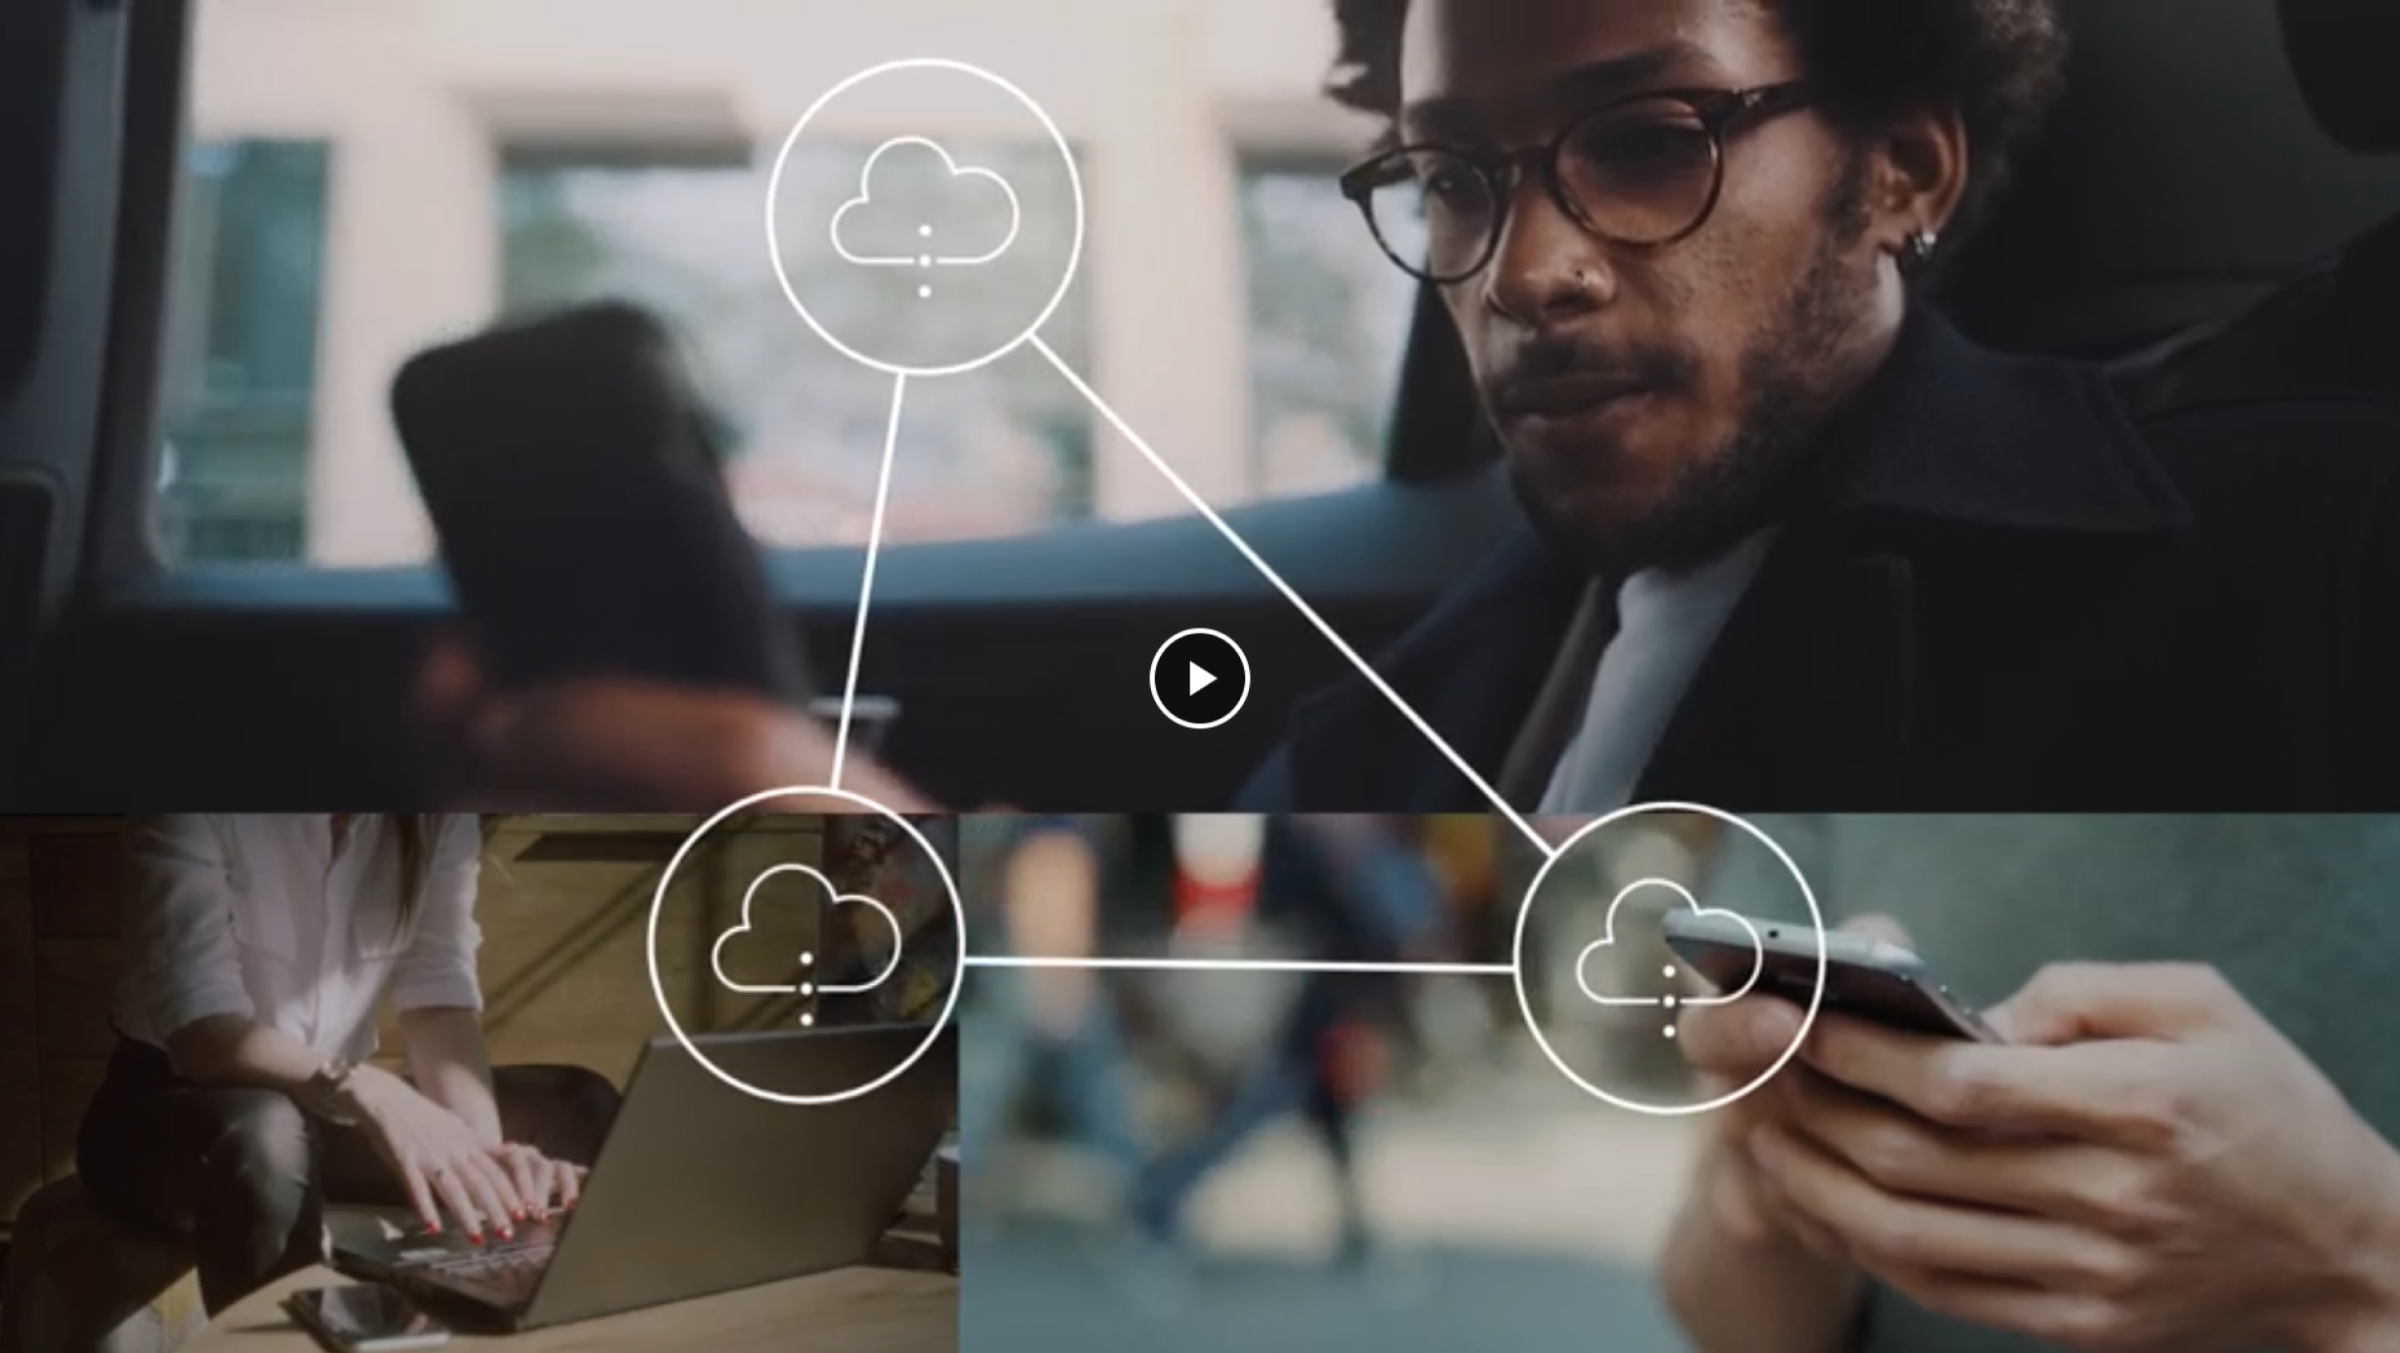 Cloud graphics overlayed on people using technology devices